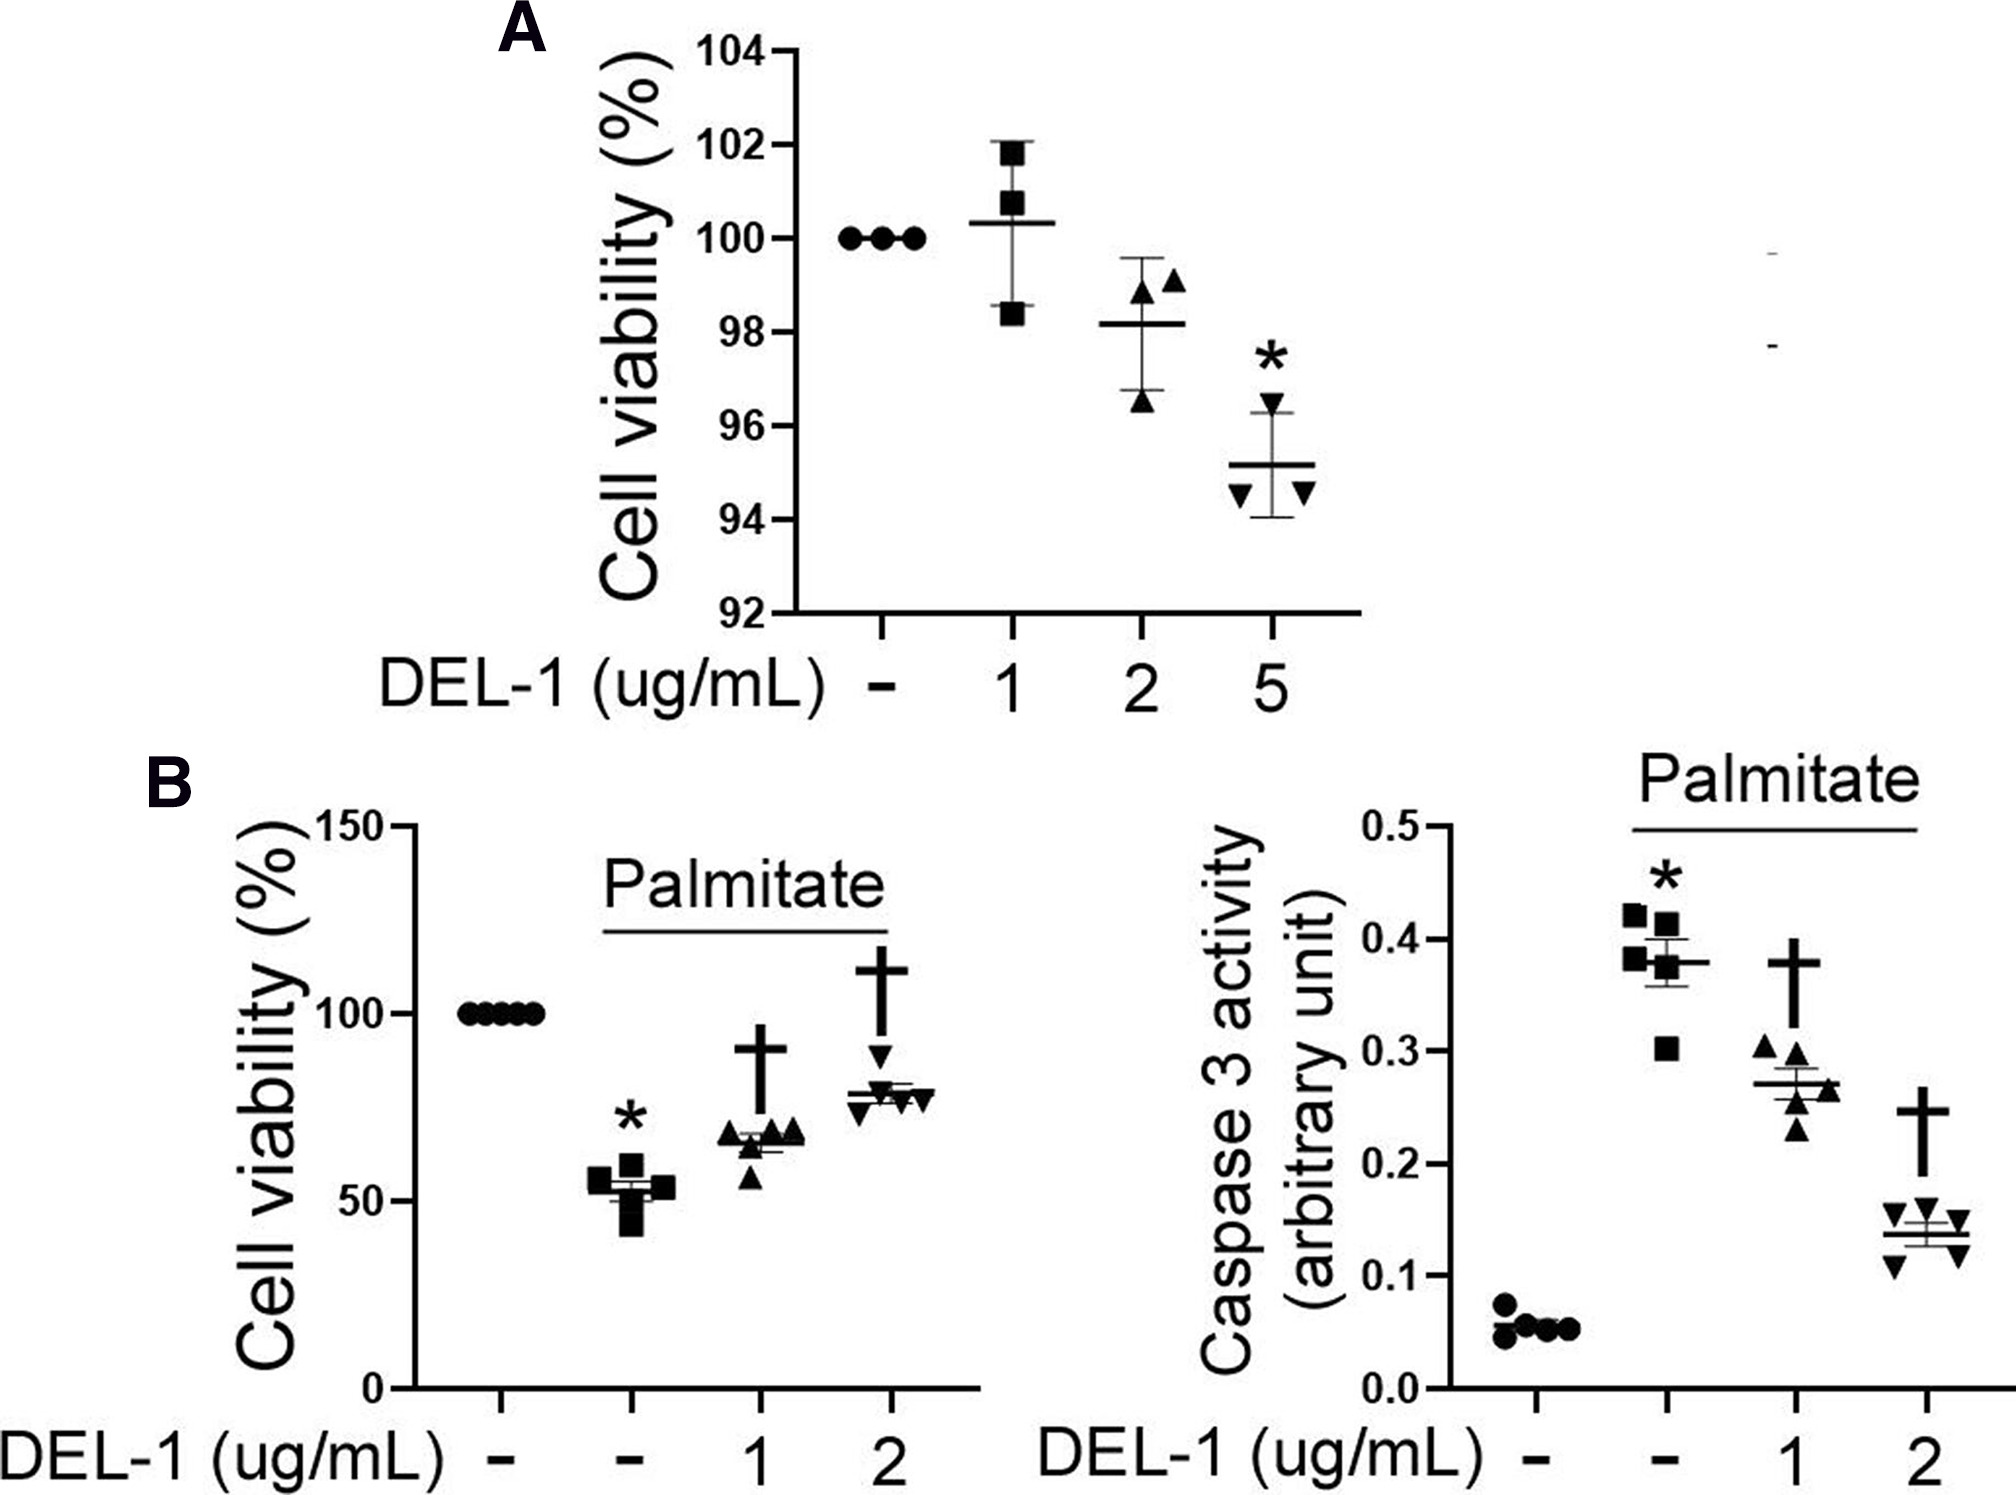 Fig. 1 
            Developmental endothelial locus-1 (DEL-1) prevents apoptosis in palmitate-treated tenocytes. a) Cell viability assay in tenocytes treated with DEL-1 (0 to 2 μg/ml) for 24 hours. b) Cell viability assay and caspase 3 activity assay in tenocytes treated with palmitate (400 μM) and DEL-1 (0 to 2 μg/ml) for 24 hours. Means and standard deviations were calculated from three or five independent experiments. Significance (p < 0.05). *: vs control.†: vs palmitate.
          